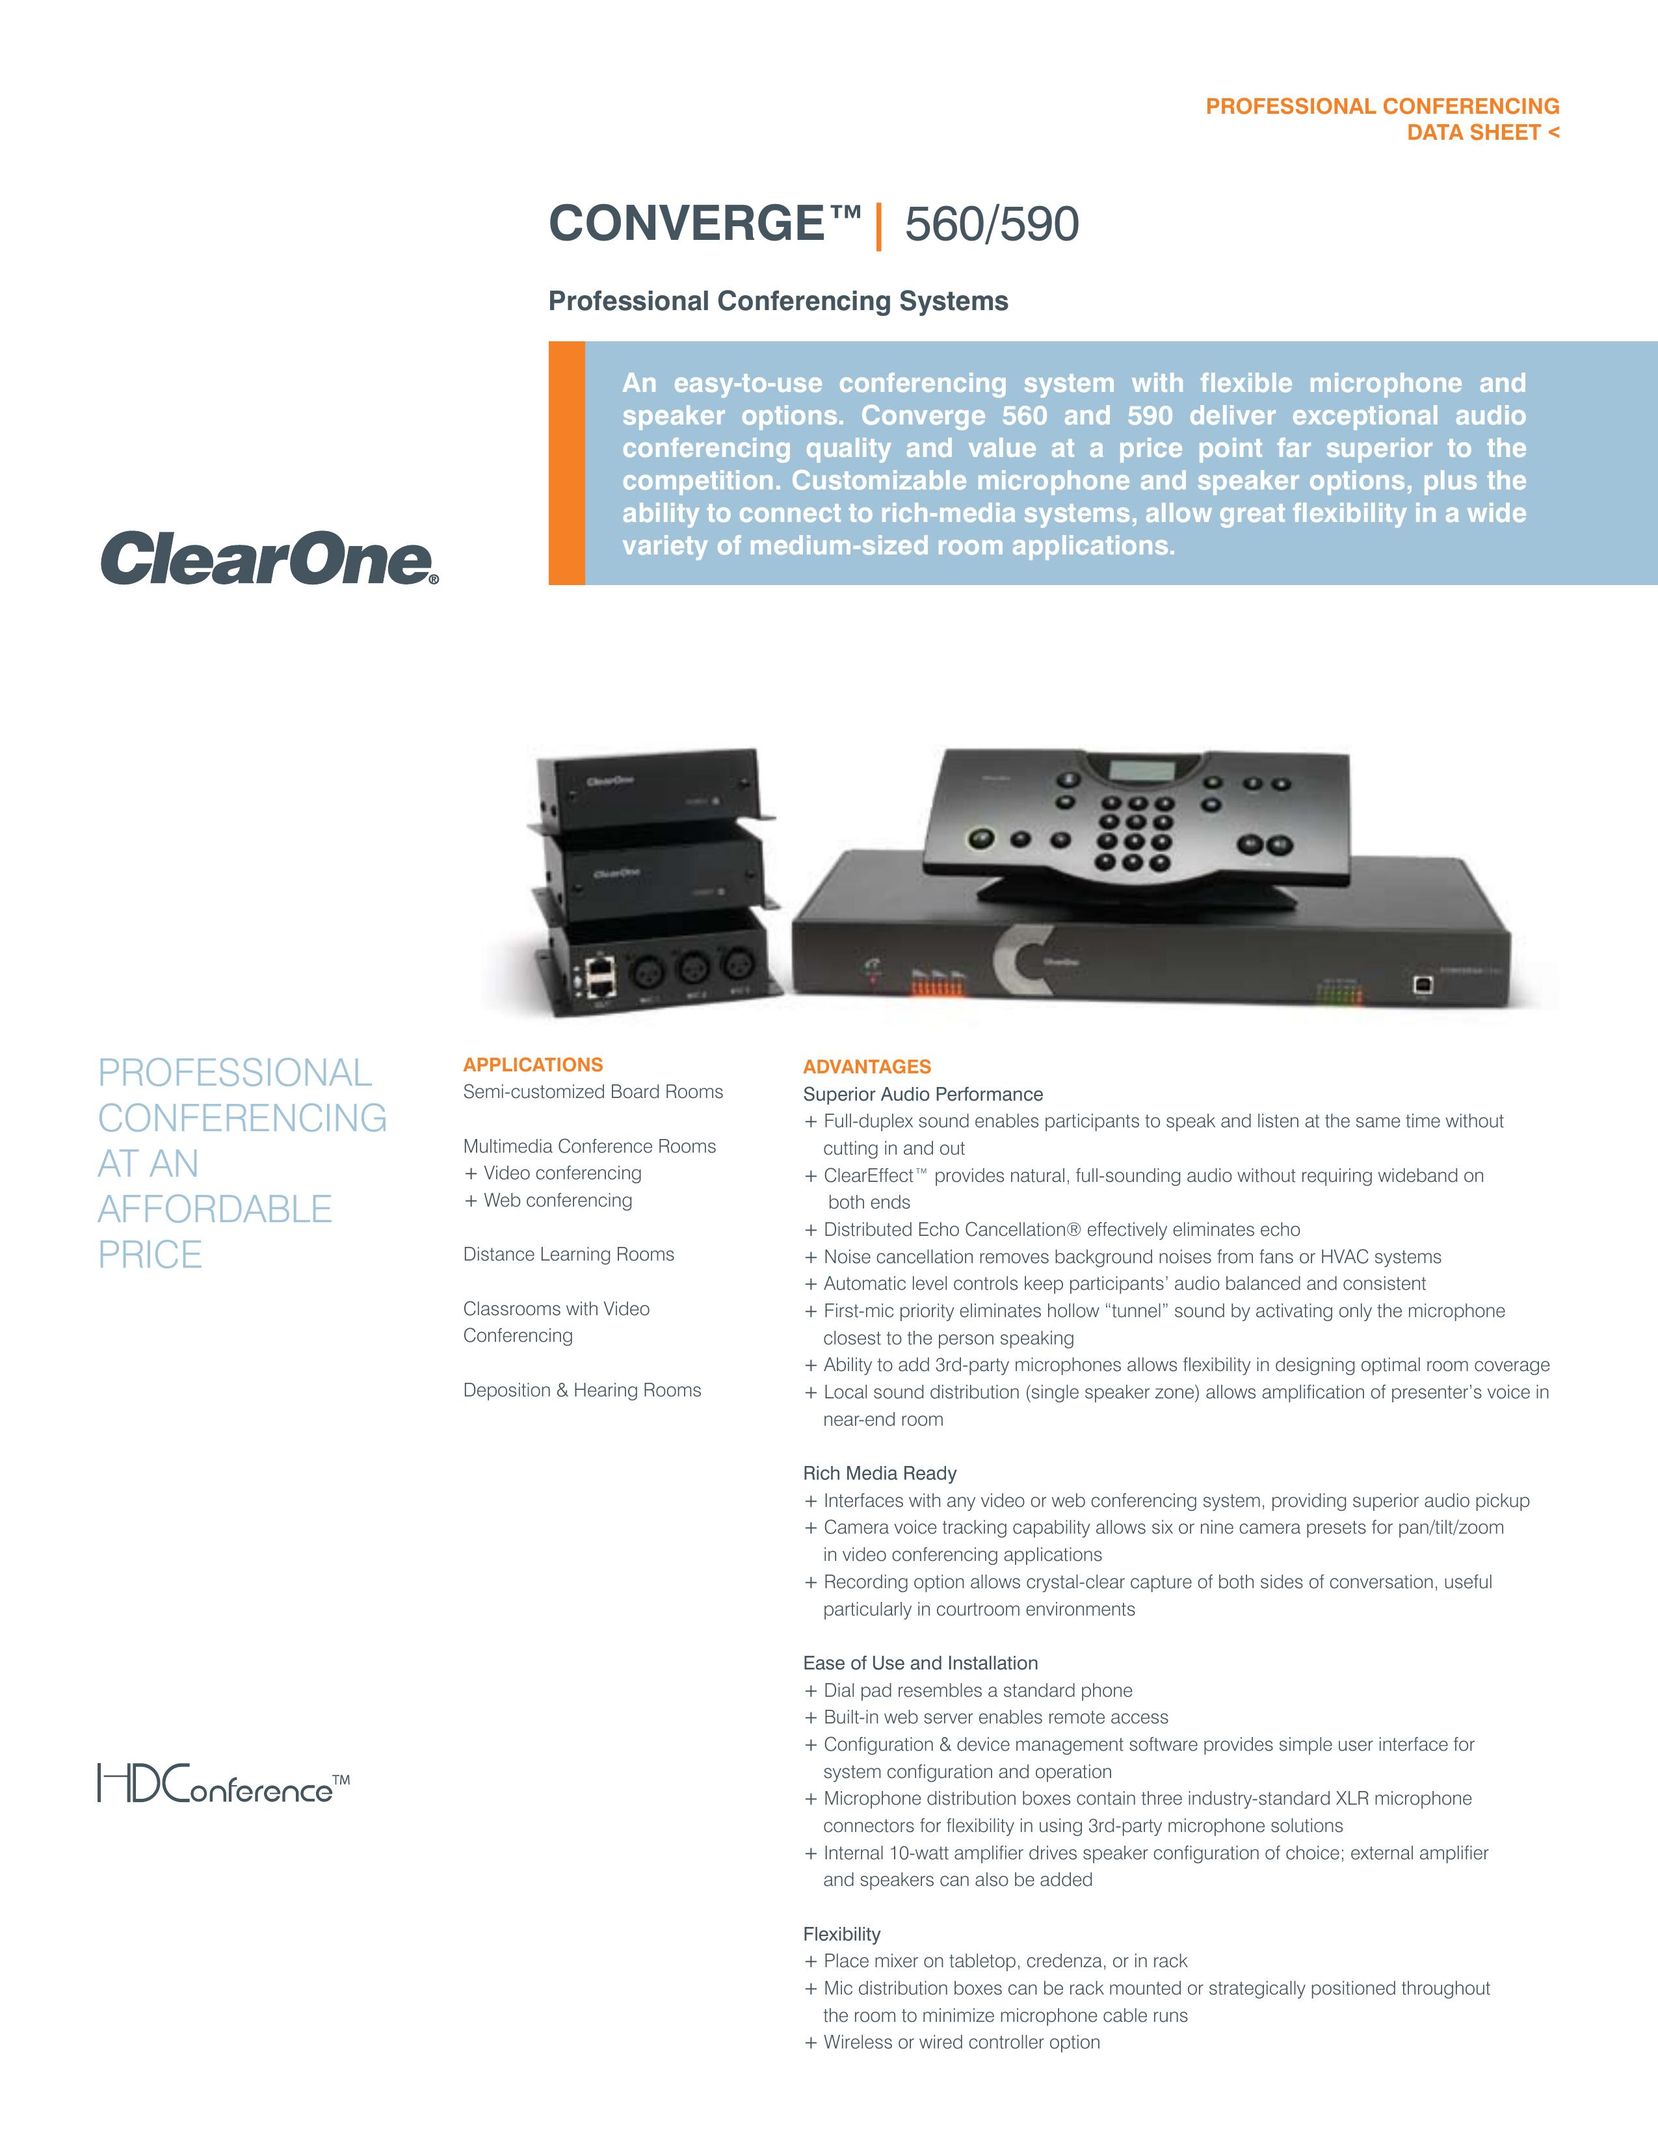 ClearOne comm 560 Conference Phone User Manual